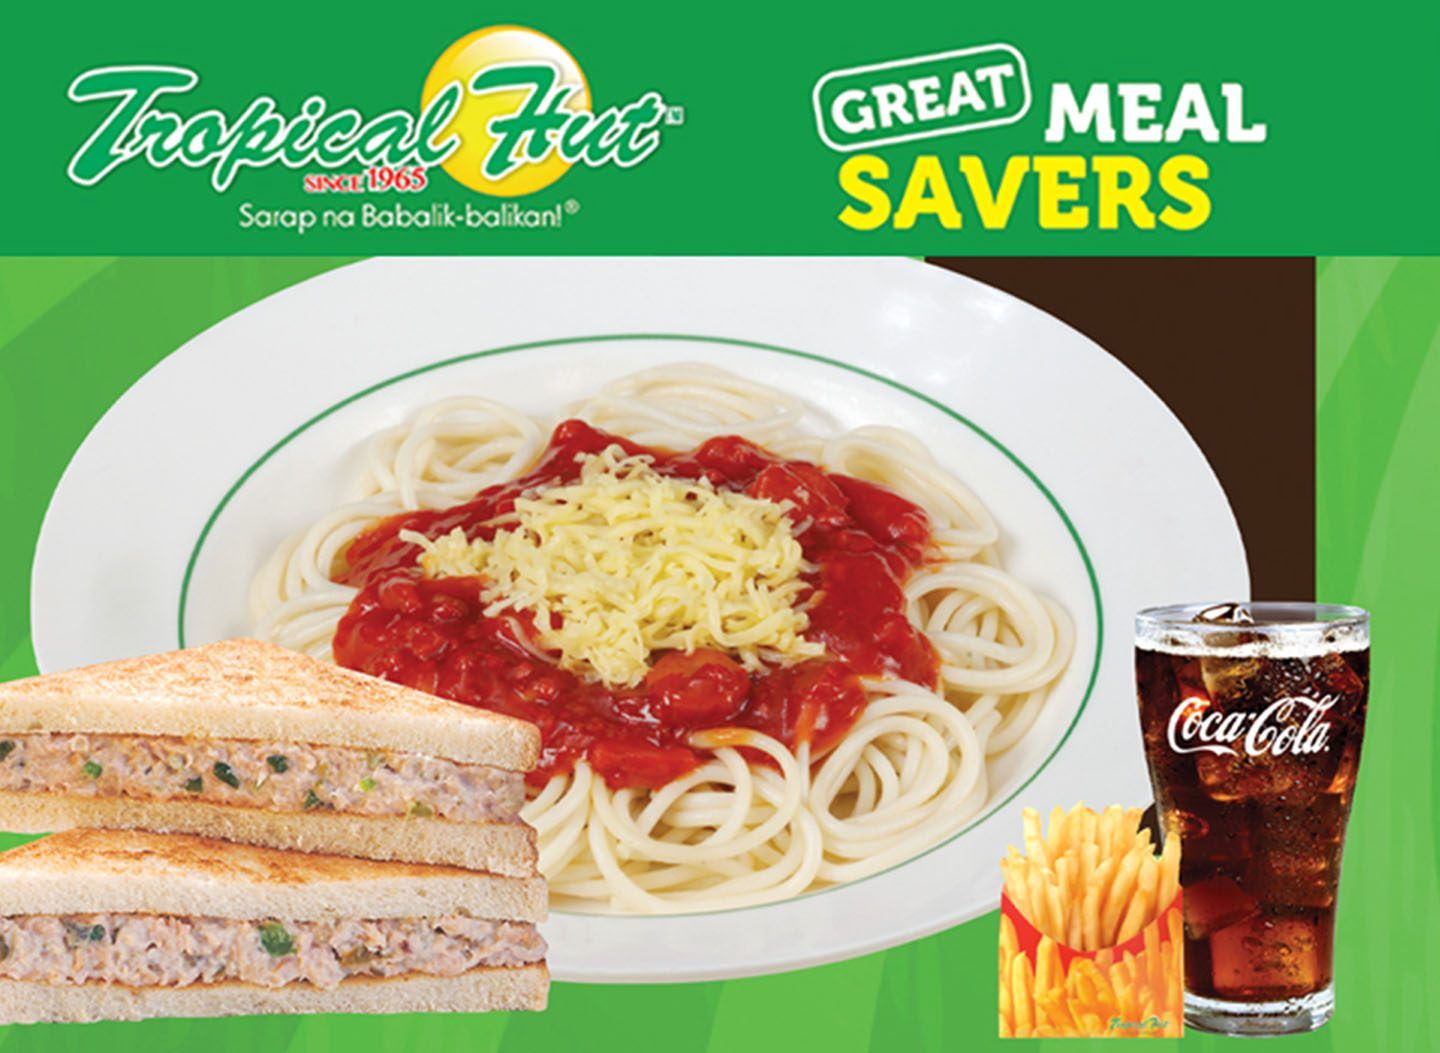 Great Meal Savers 3